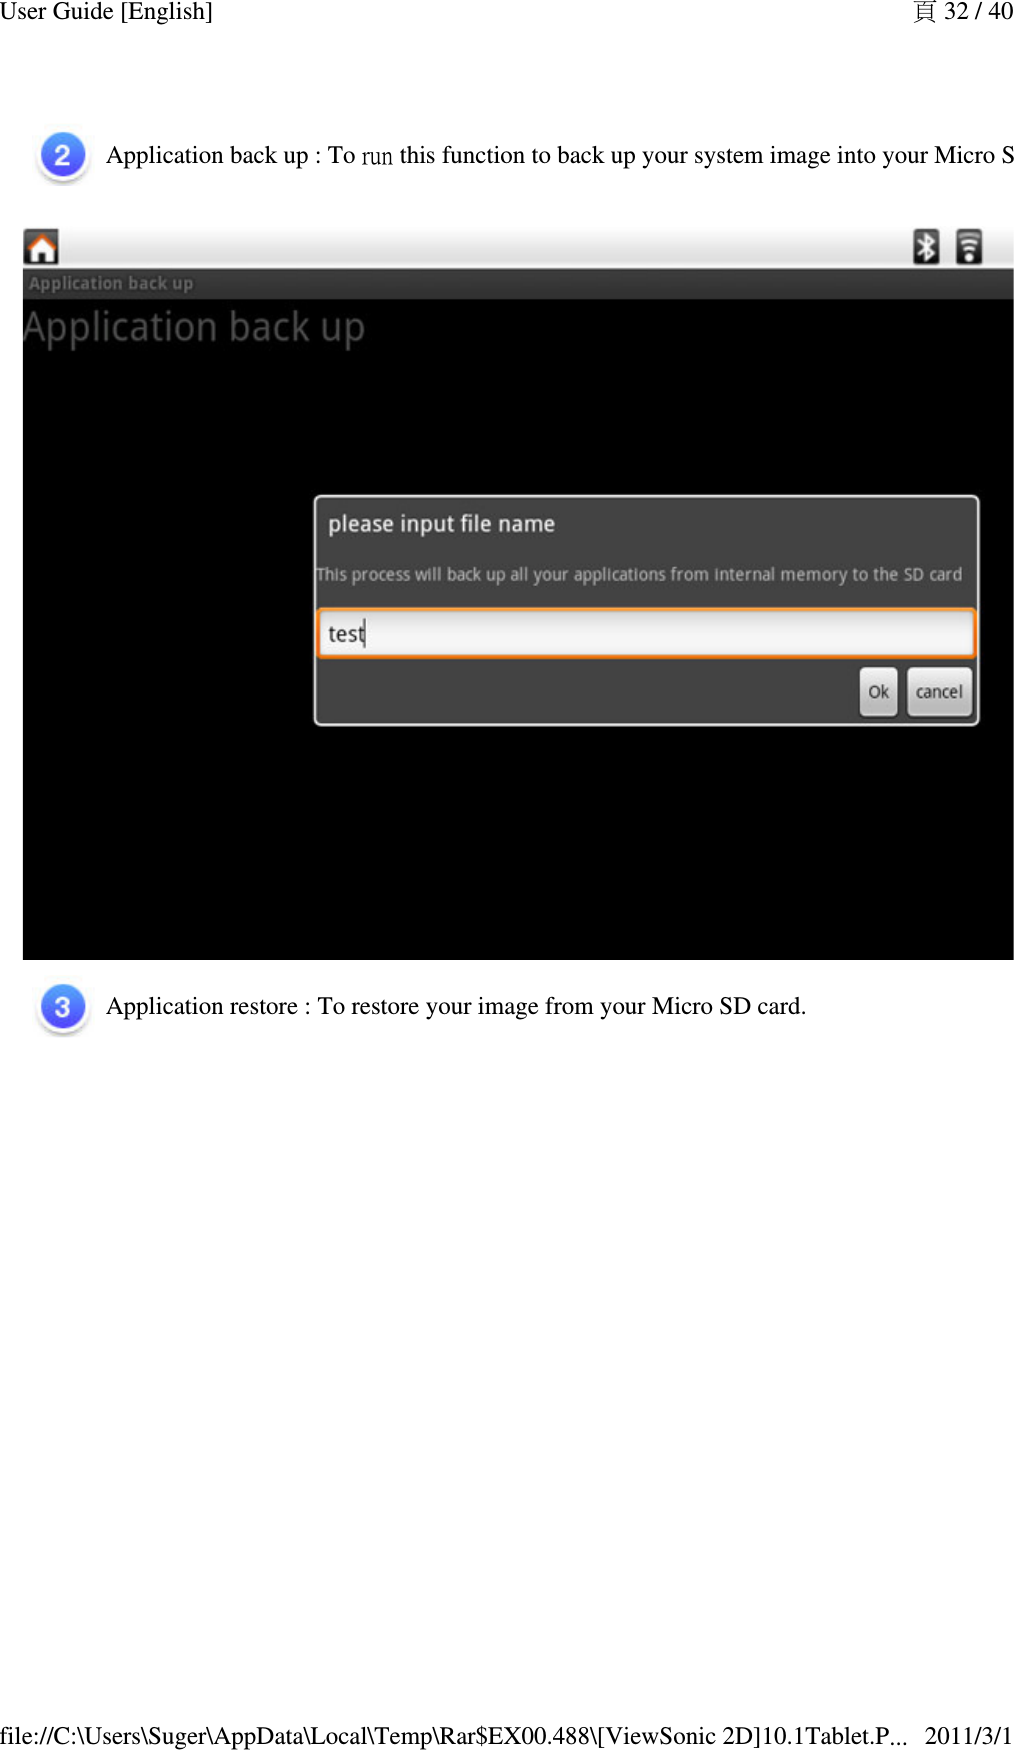 Application back up : To run this function to back up your system image into your Micro SD card. Application restore : To restore your image from your Micro SD card. 頁 32 / 40User Guide [English]2011/3/1file://C:\Users\Suger\AppData\Local\Temp\Rar$EX00.488\[ViewSonic 2D]10.1Tablet.P...